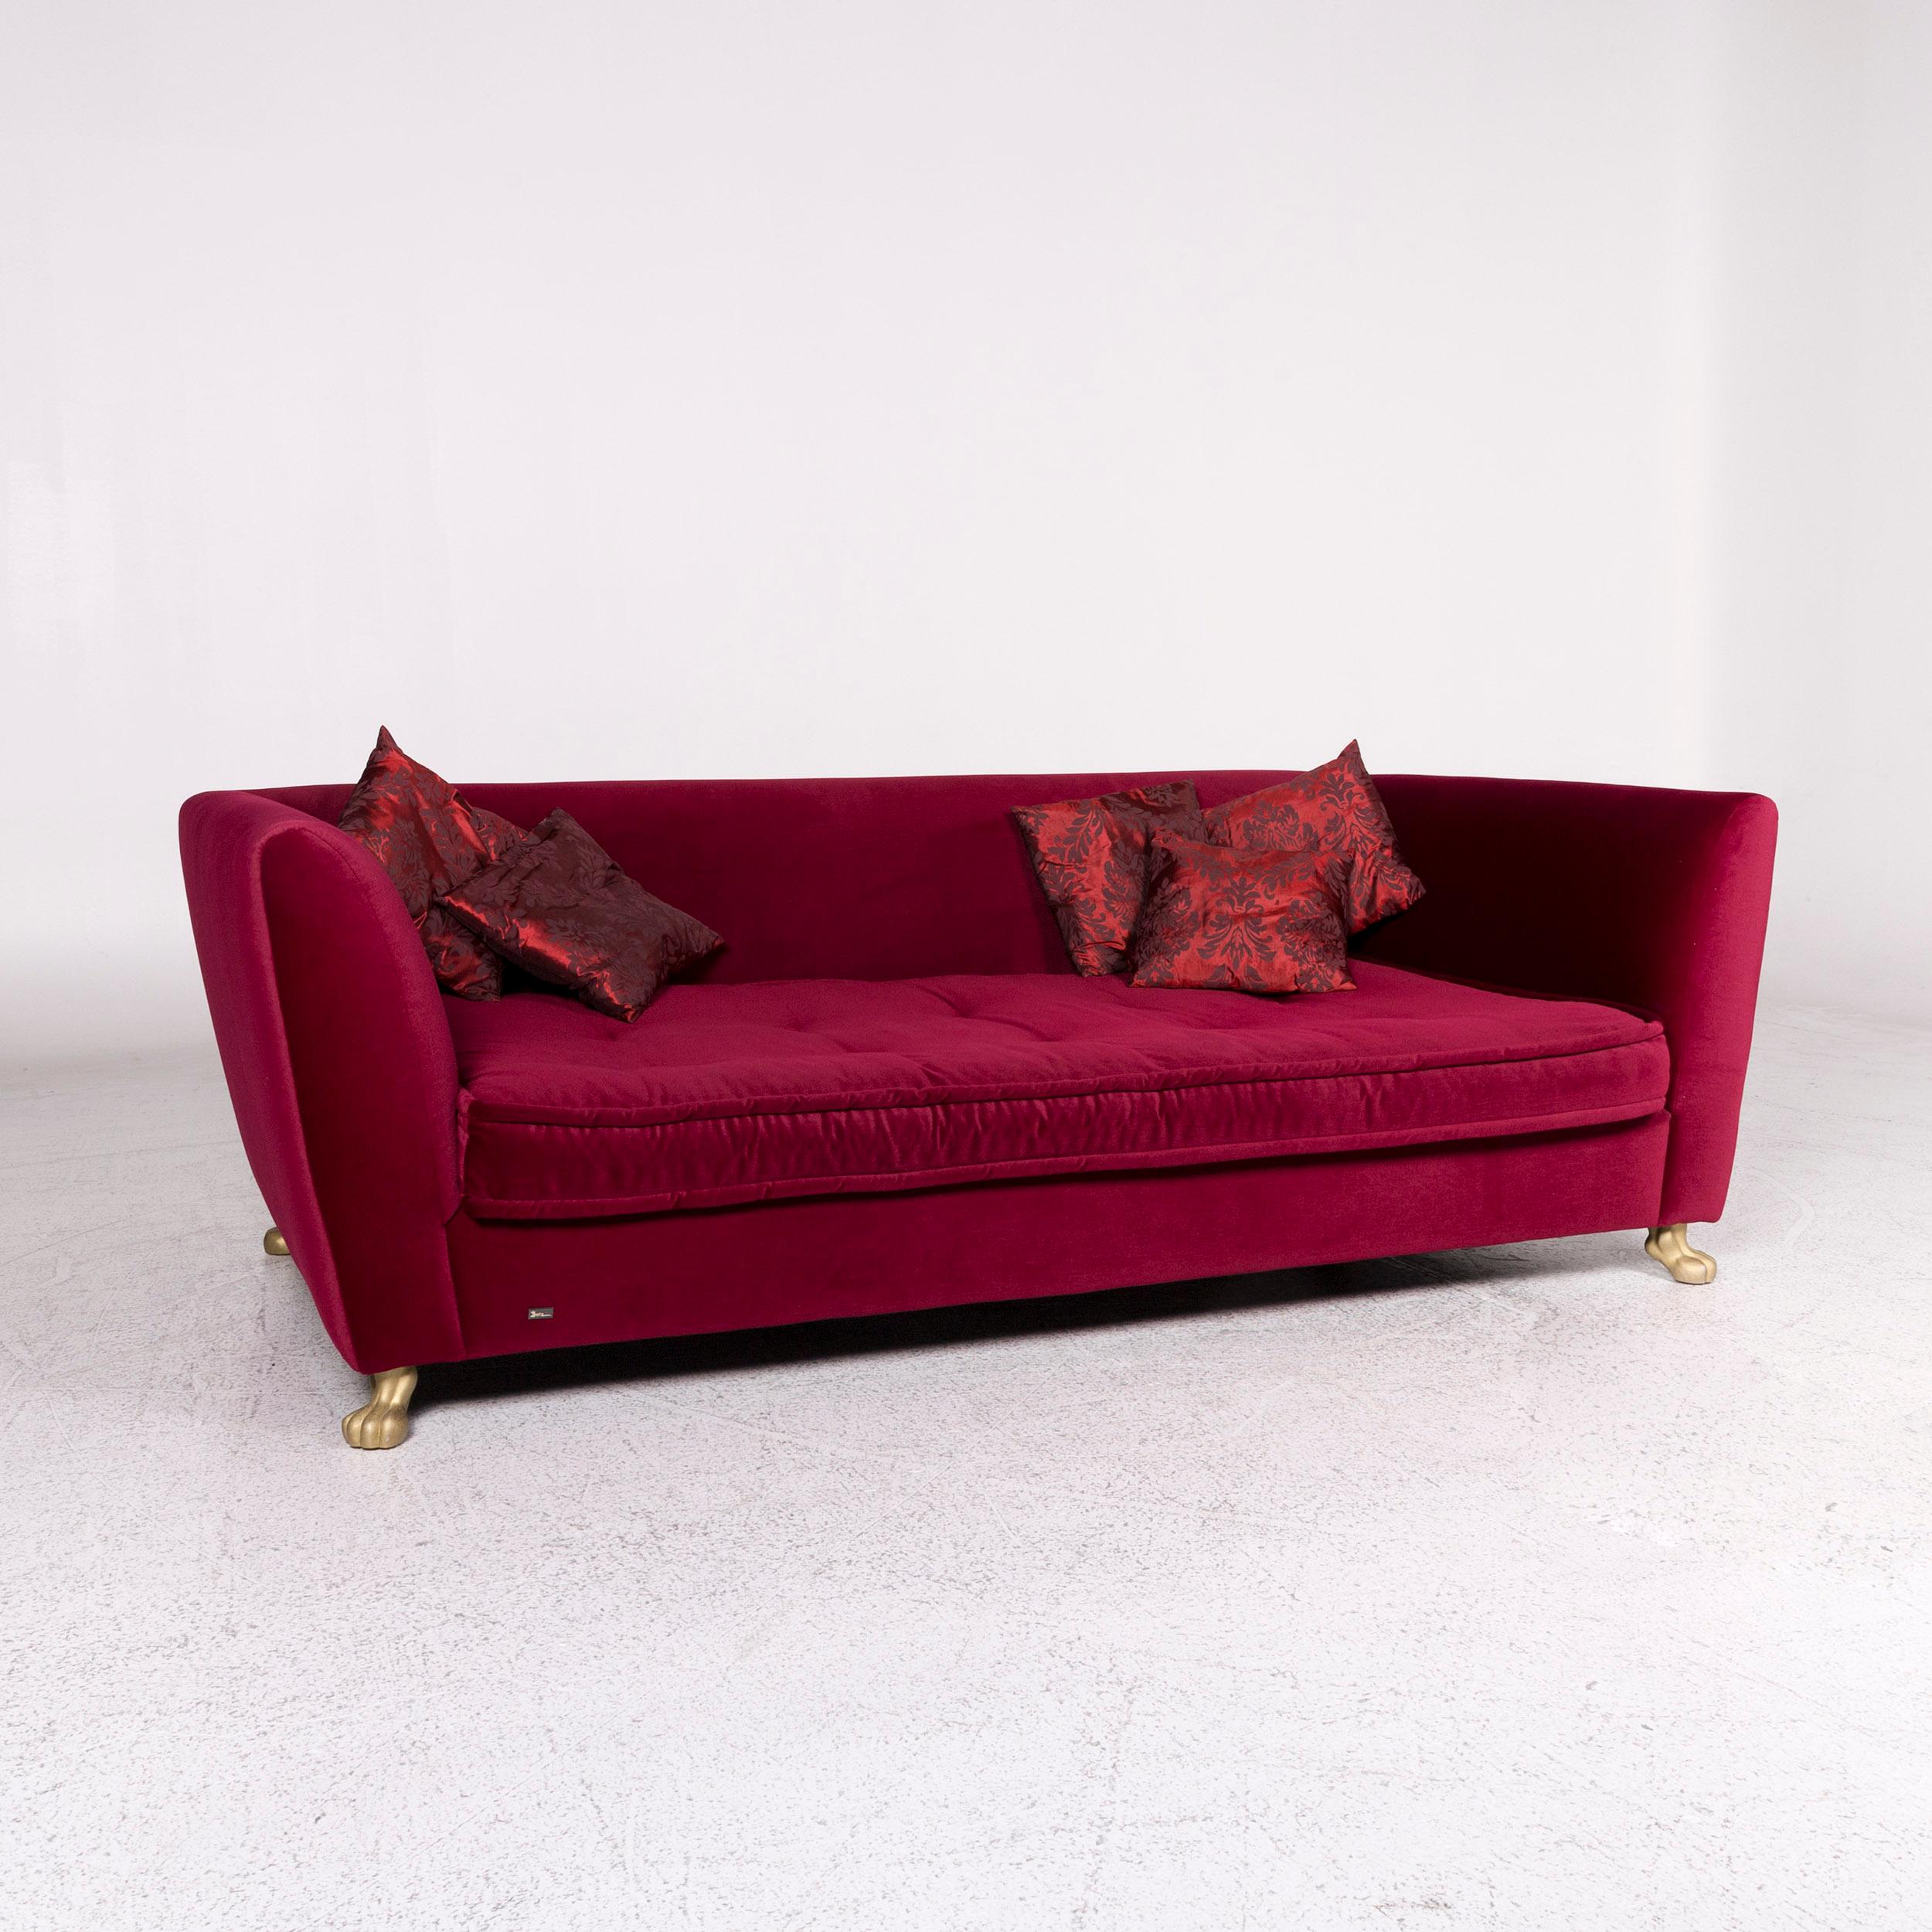 We bring to you a Bretz monster velvet fabric sofa purple four-seat couch.
 
Product measurements in centimetres:
 
Depth 135
Width 243
Height 80
Seat-height 44
Rest-height 80
Seat-depth 106
Seat-width 190
Back-height 35.

  